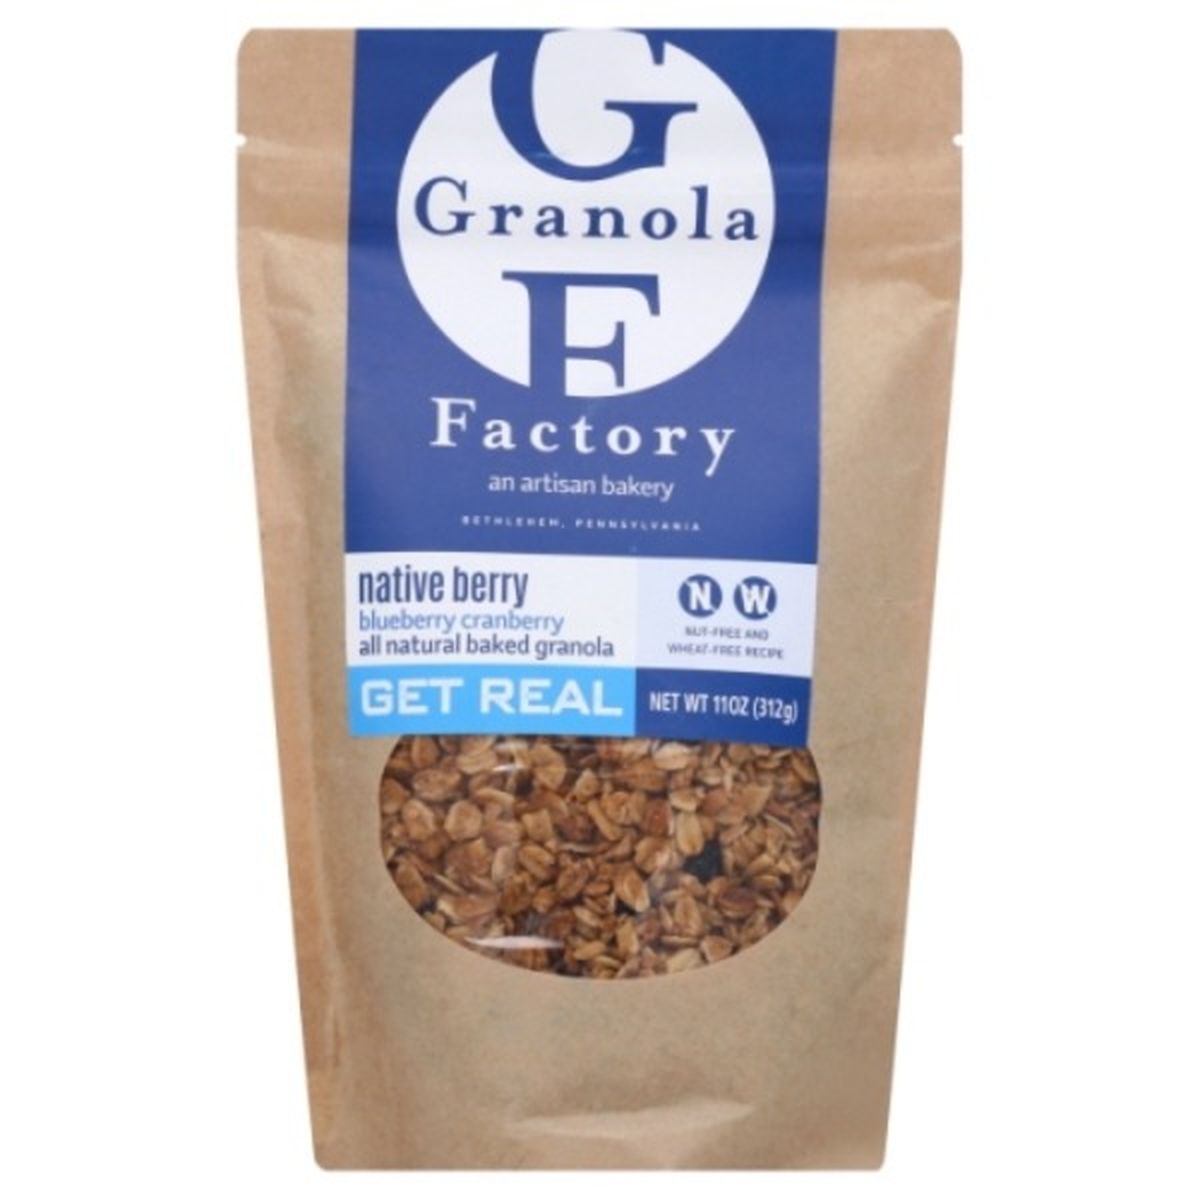 Calories in The Granola Factory Granola, Native Berry, Blueberry Cranberry